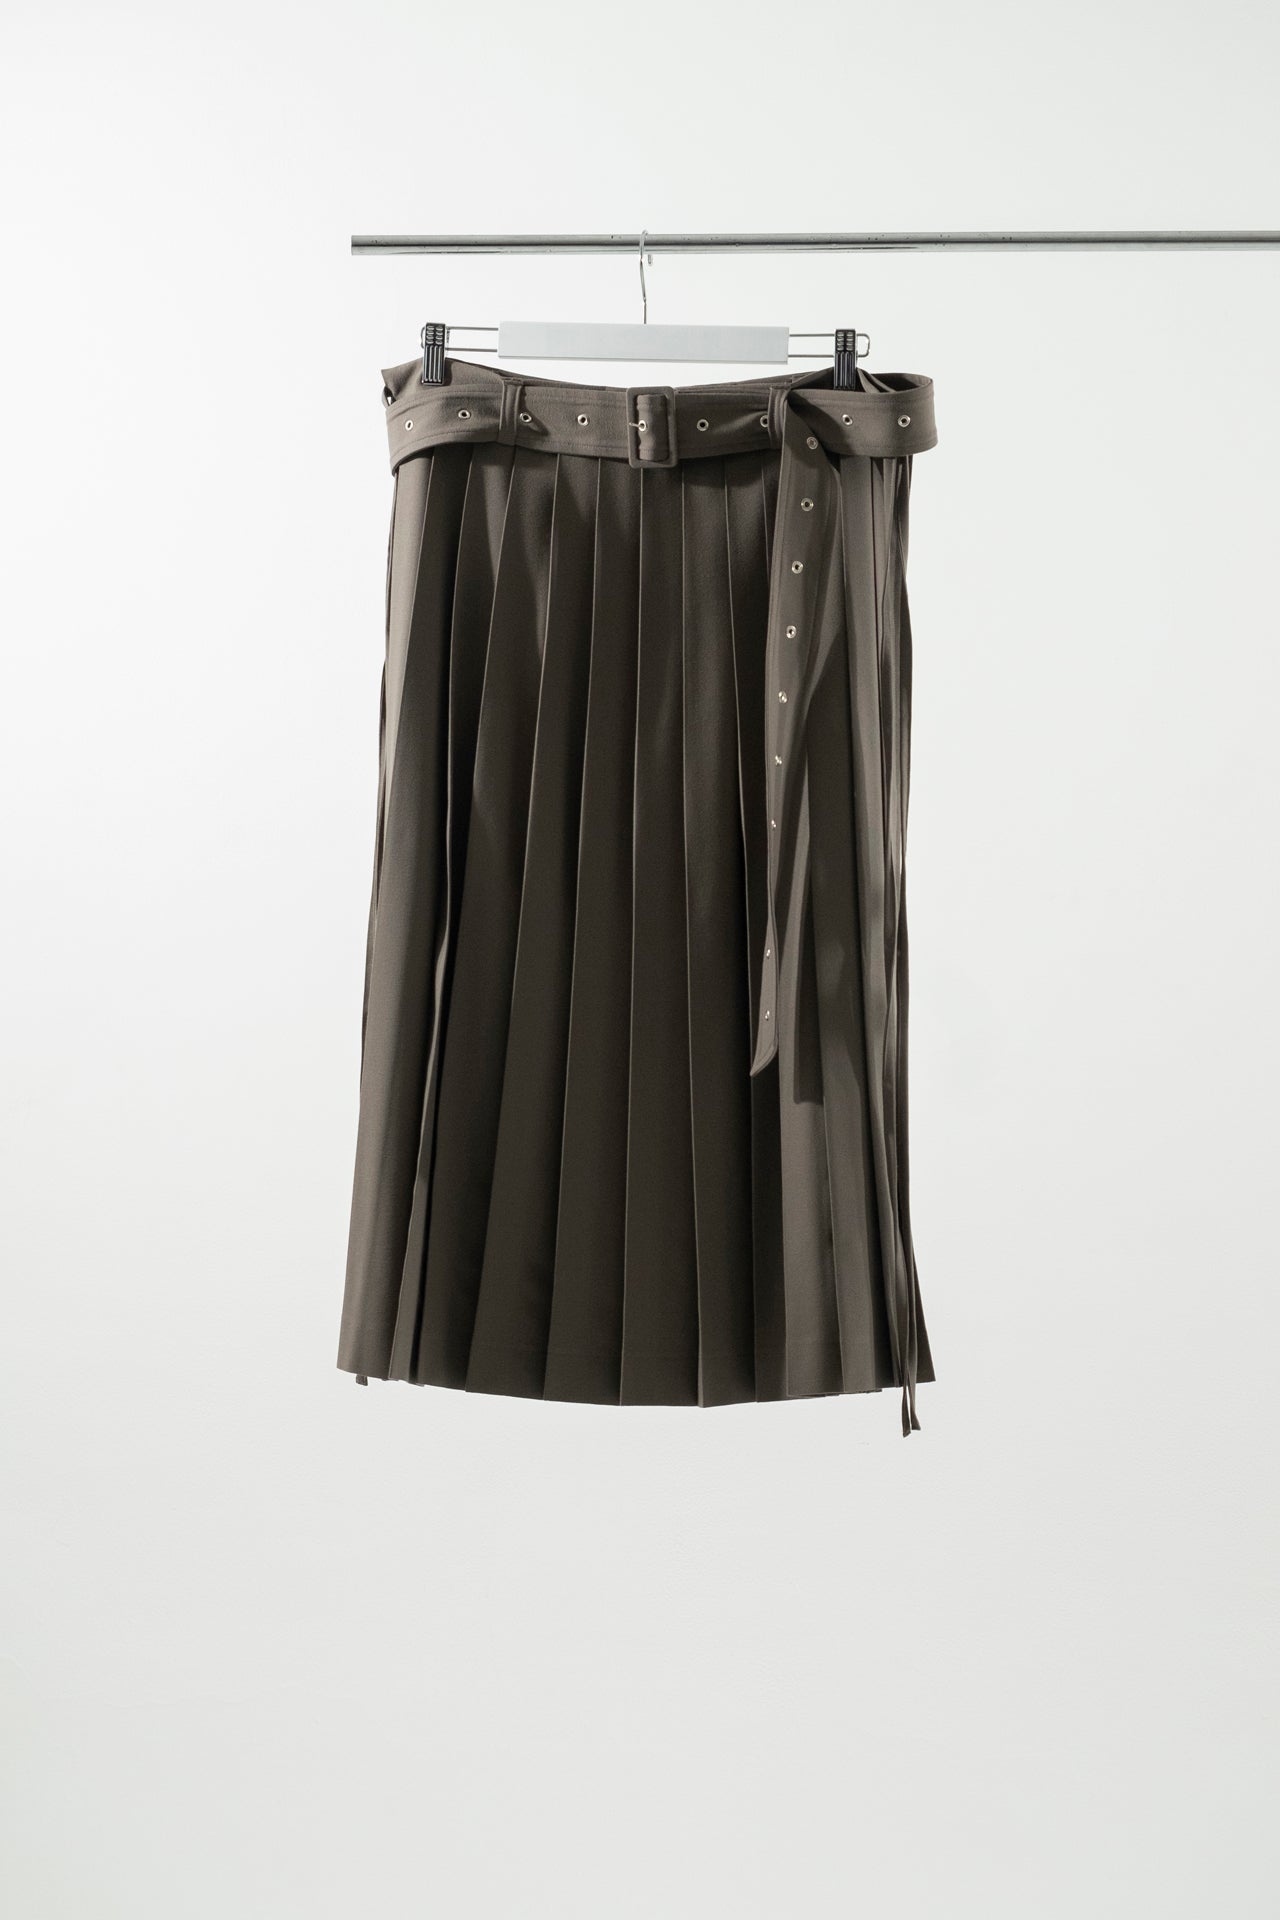 Layer_Parts Pleats Charcoal Gray